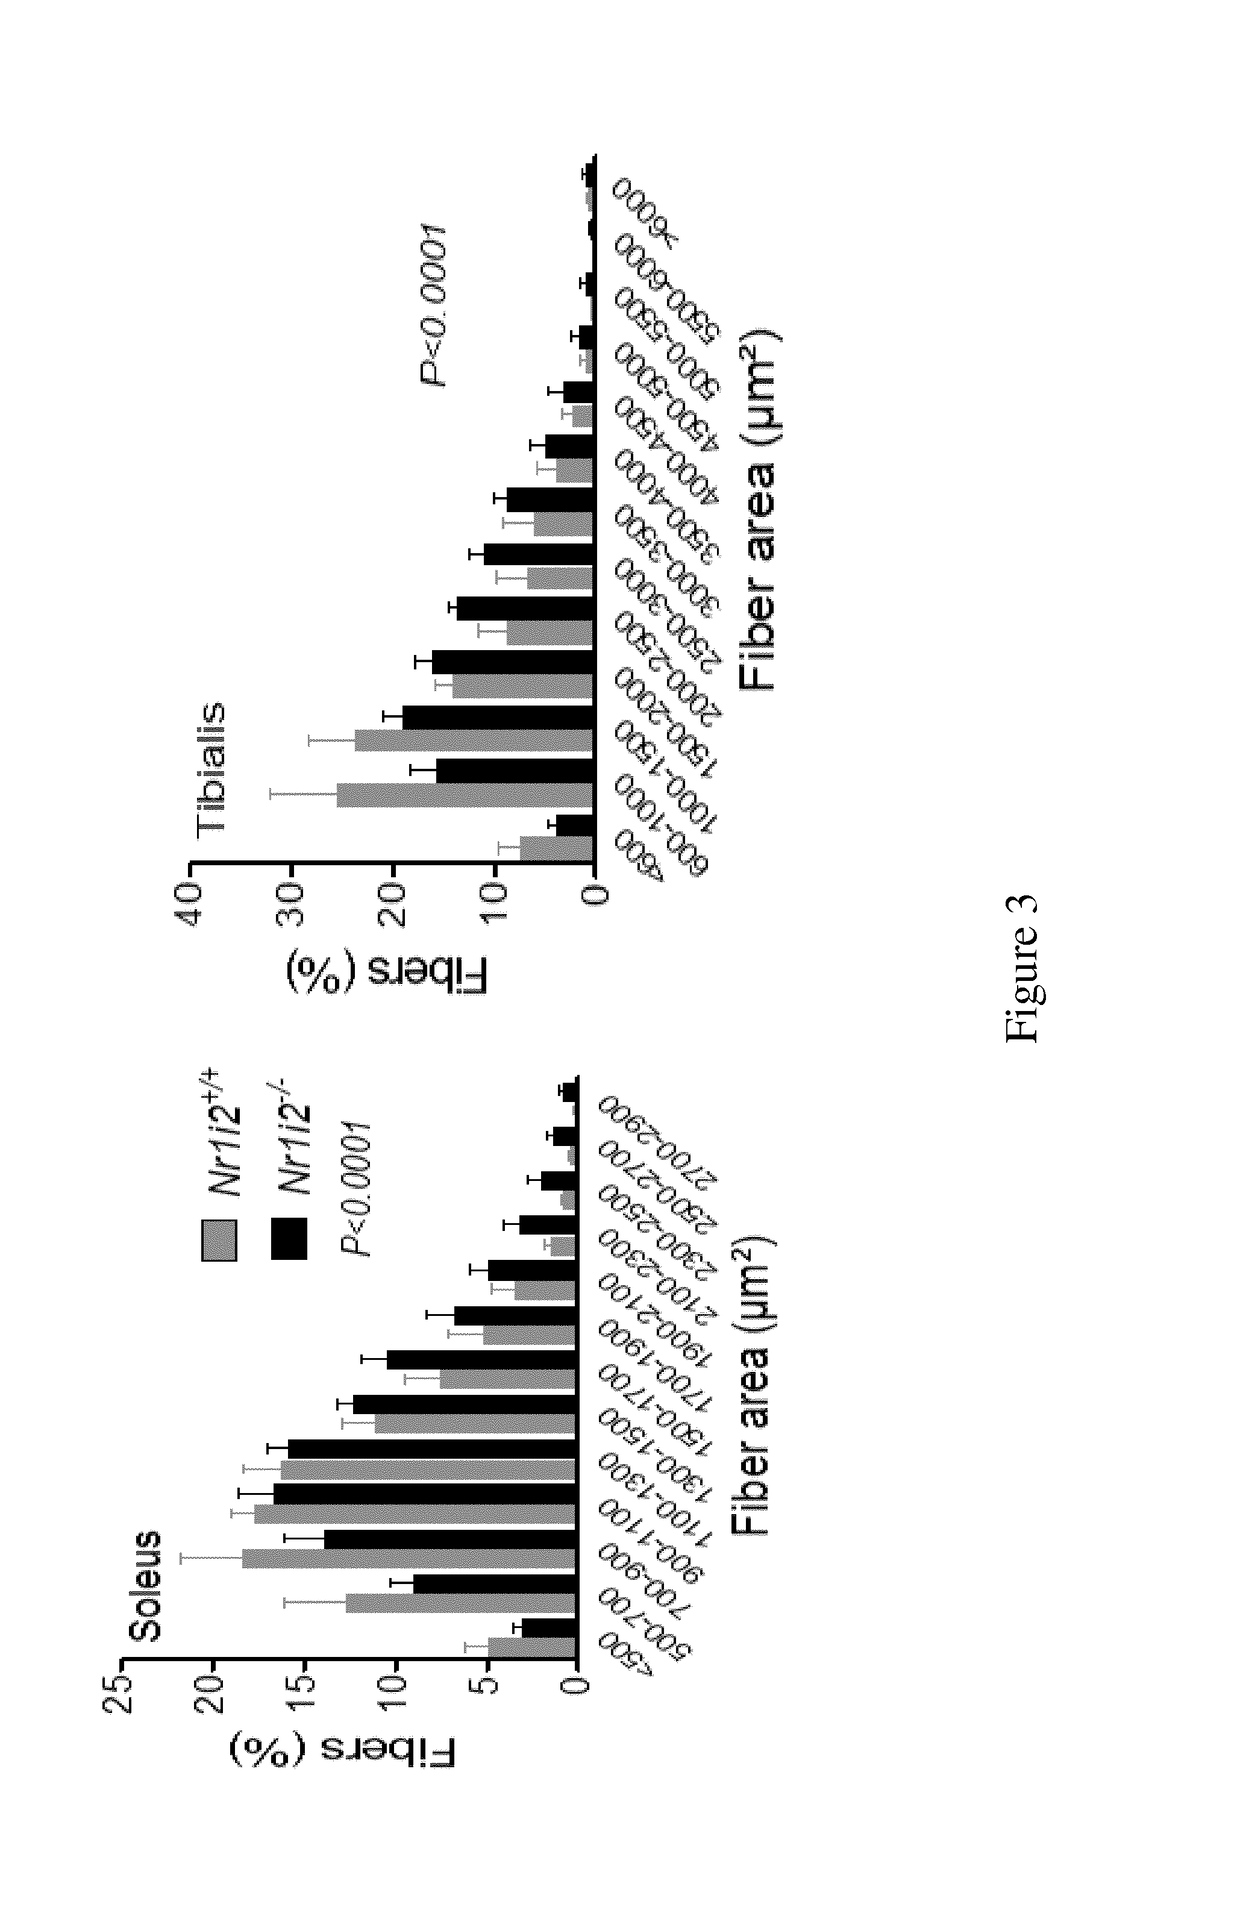 Novel therapeutic use of fgf19